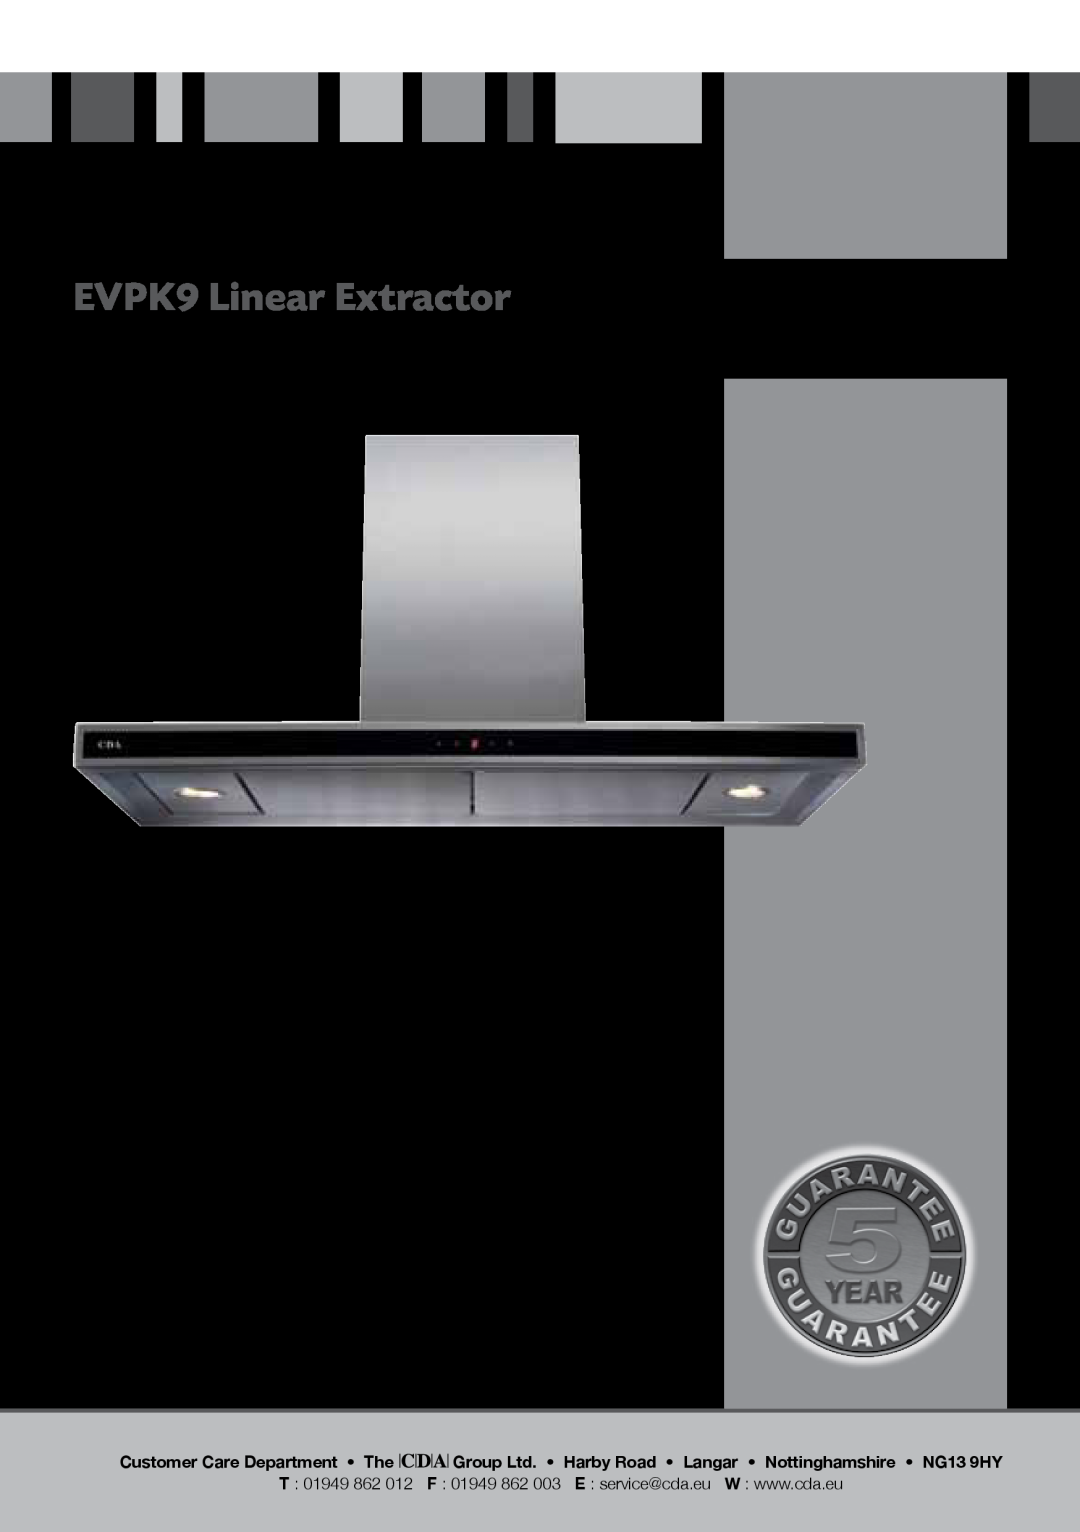 CDA manual EVPK9 Linear Extractor, Manual for Installation, Use and Maintenance, Customer Care Department The 